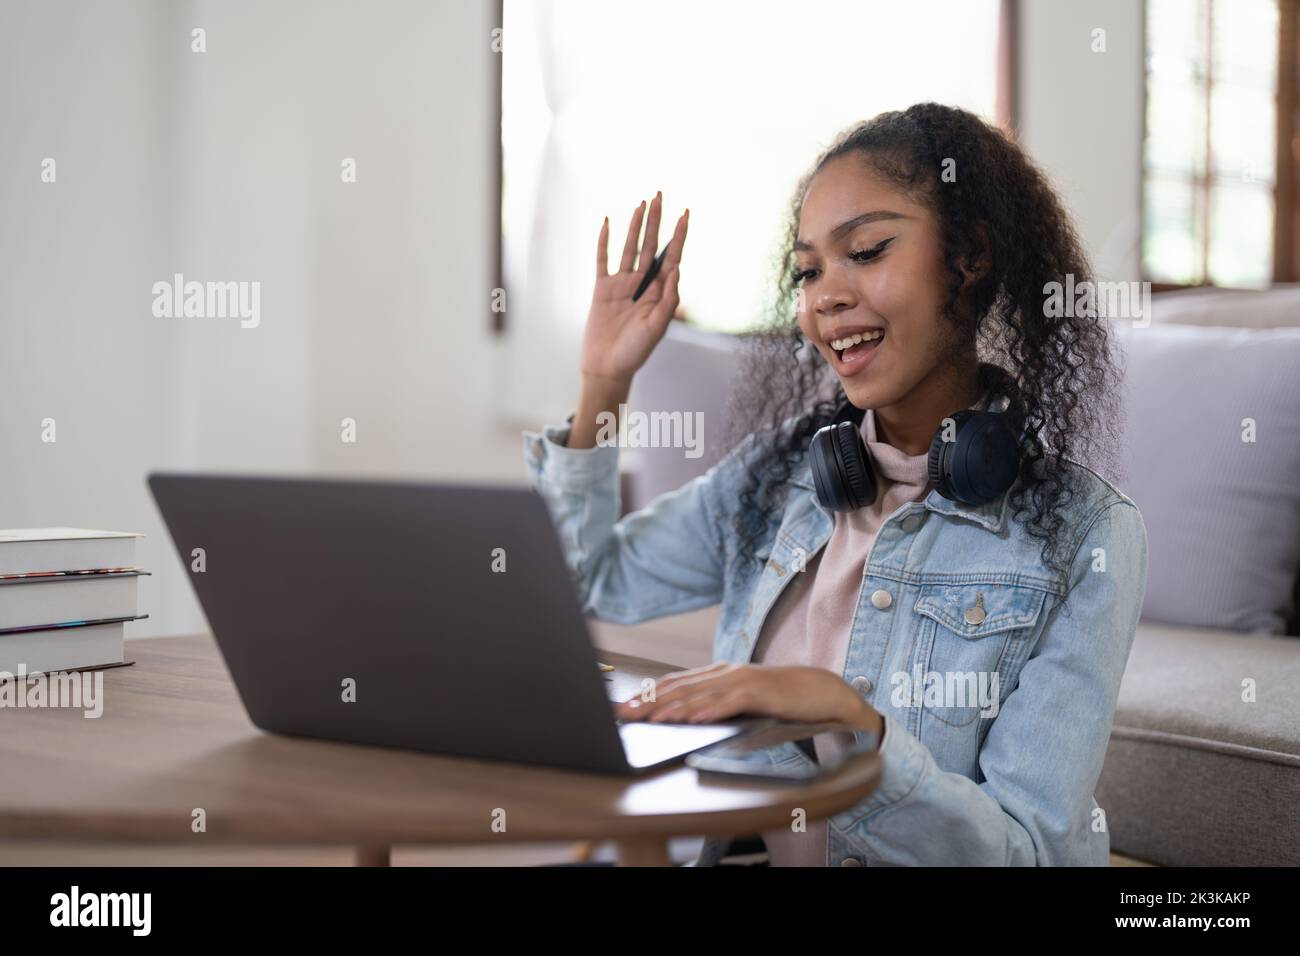 Young woman holds an online meeting while sitting in home. Woman waving hand greeting participants of a video call. Online learning concept. Stock Photo